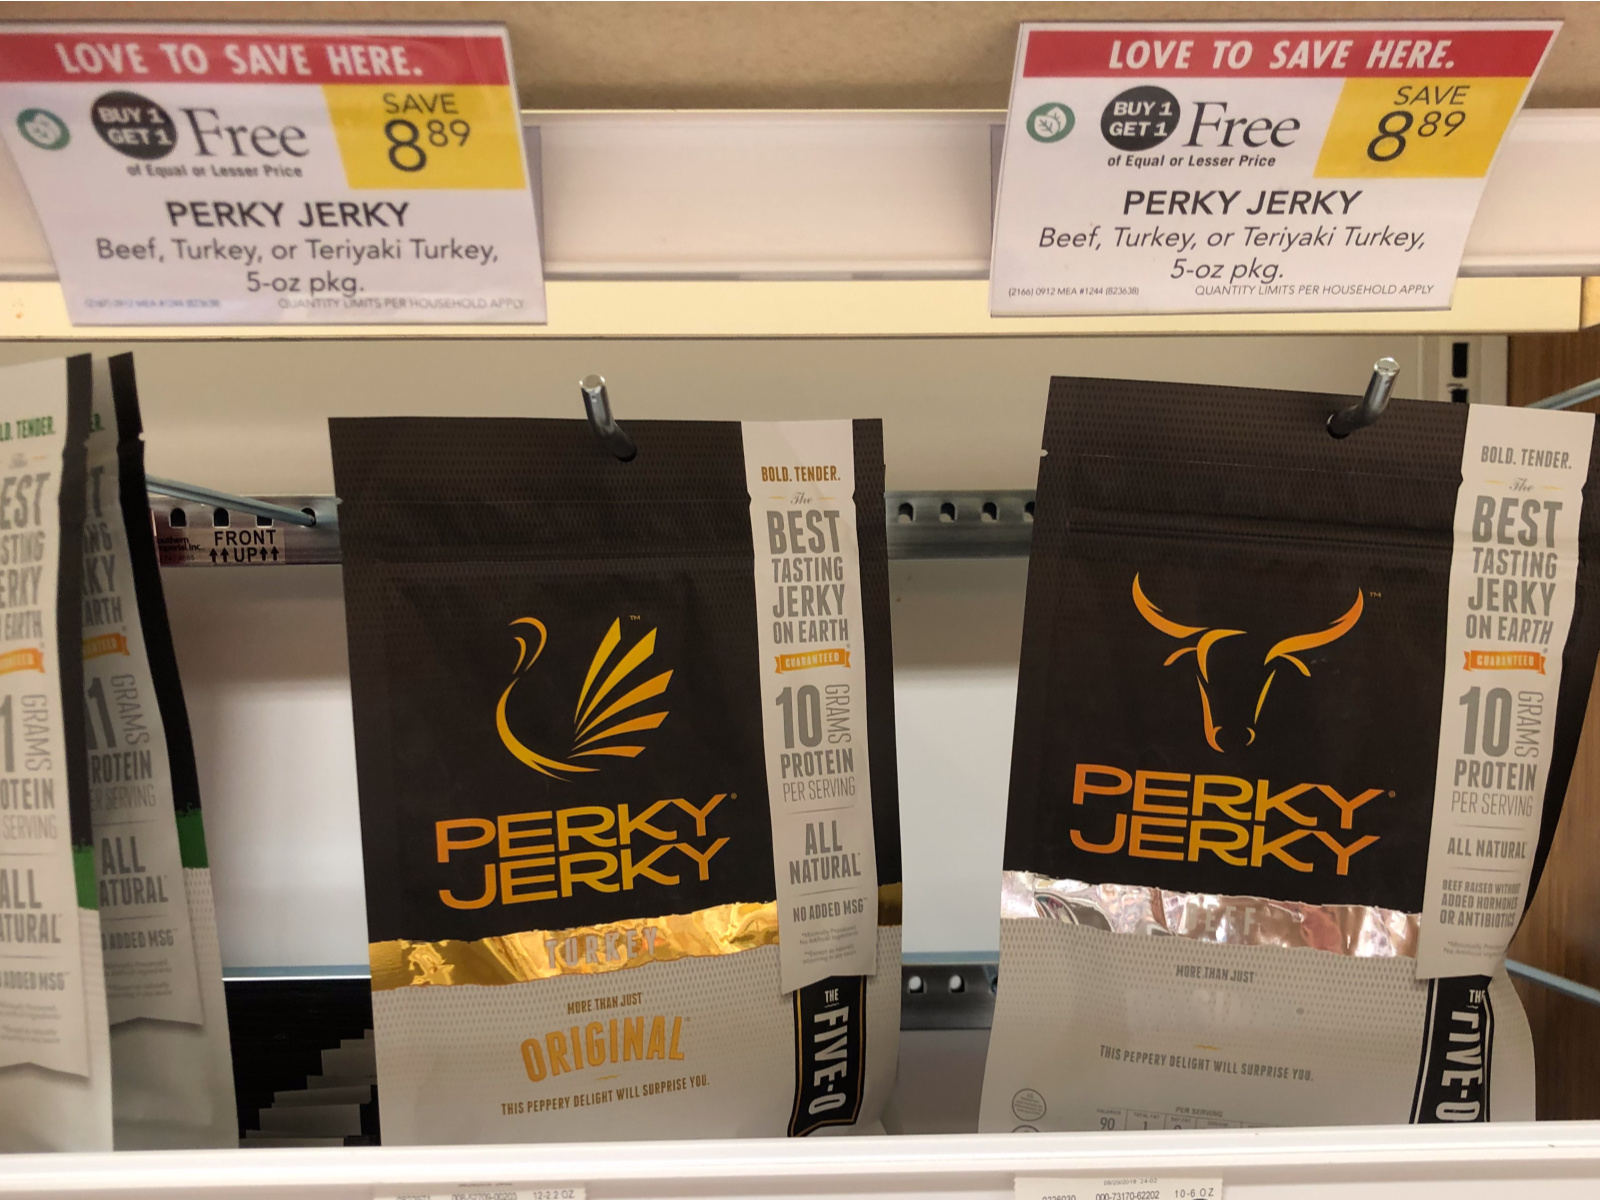 Stock Your Cart With The Best Tasting Jerky On Earth - Perky Jerky Is BOGO At Publix! on I Heart Publix